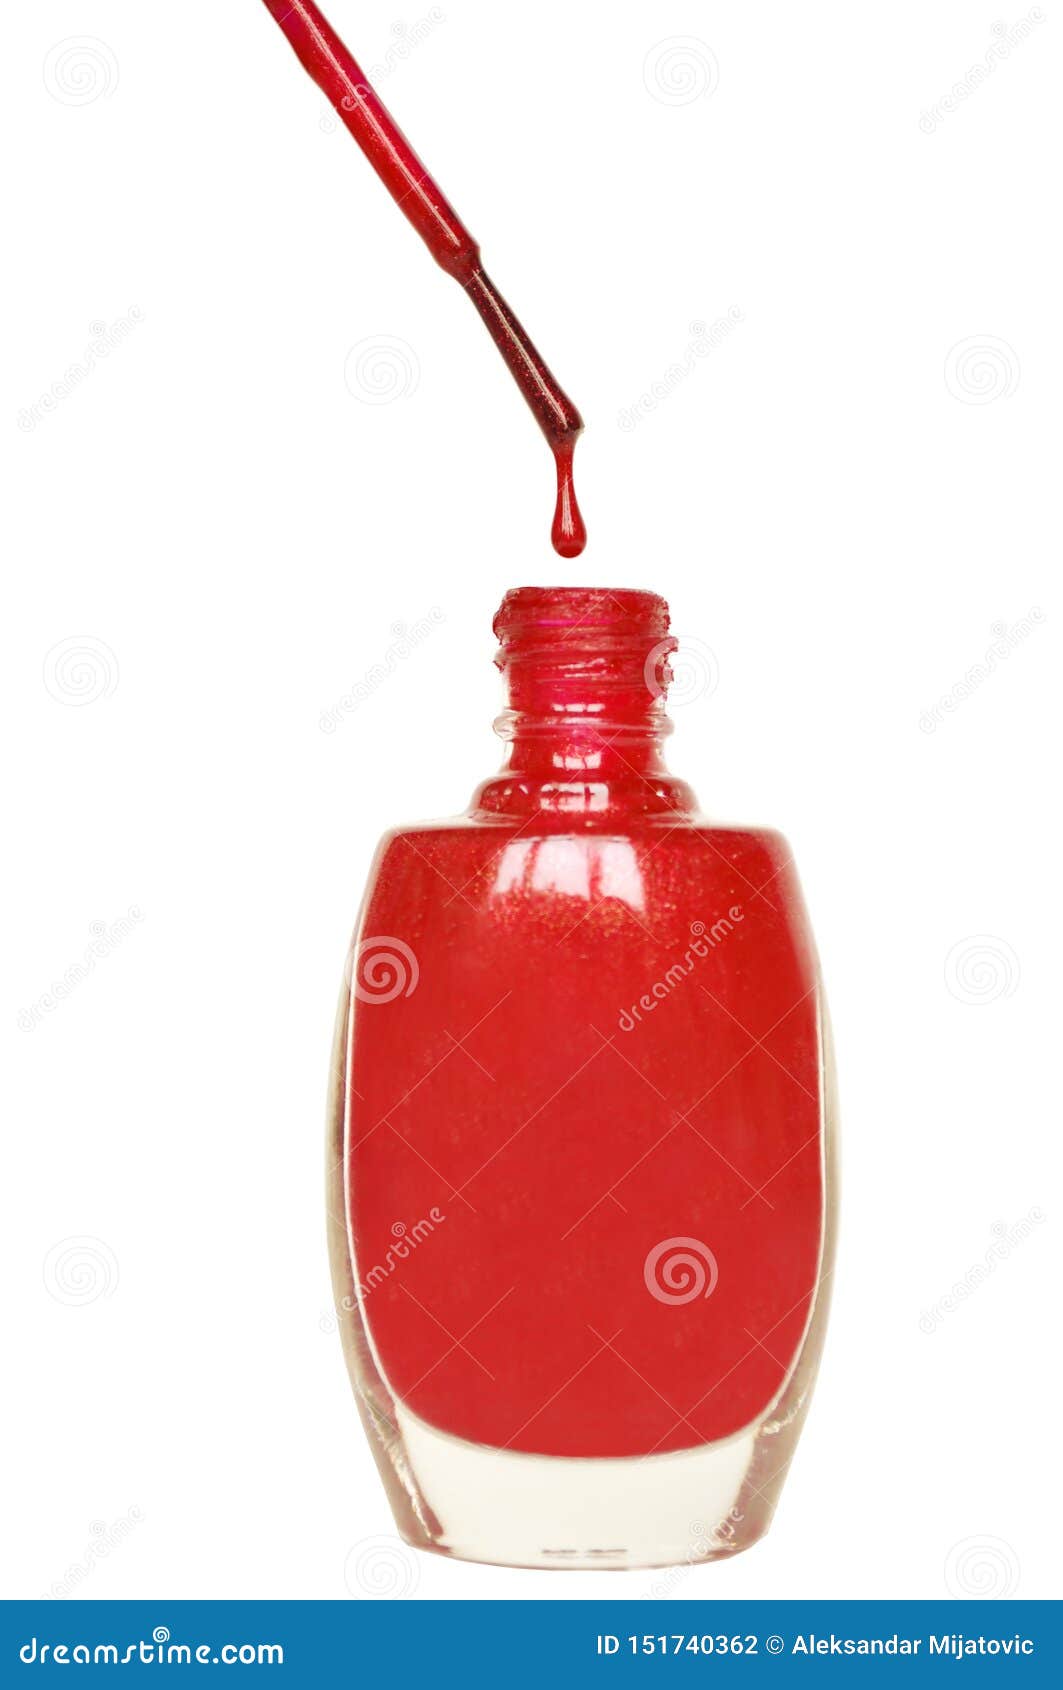 Red Nail Polish Dripping from Brush Stock Photo - Image of accessory ...